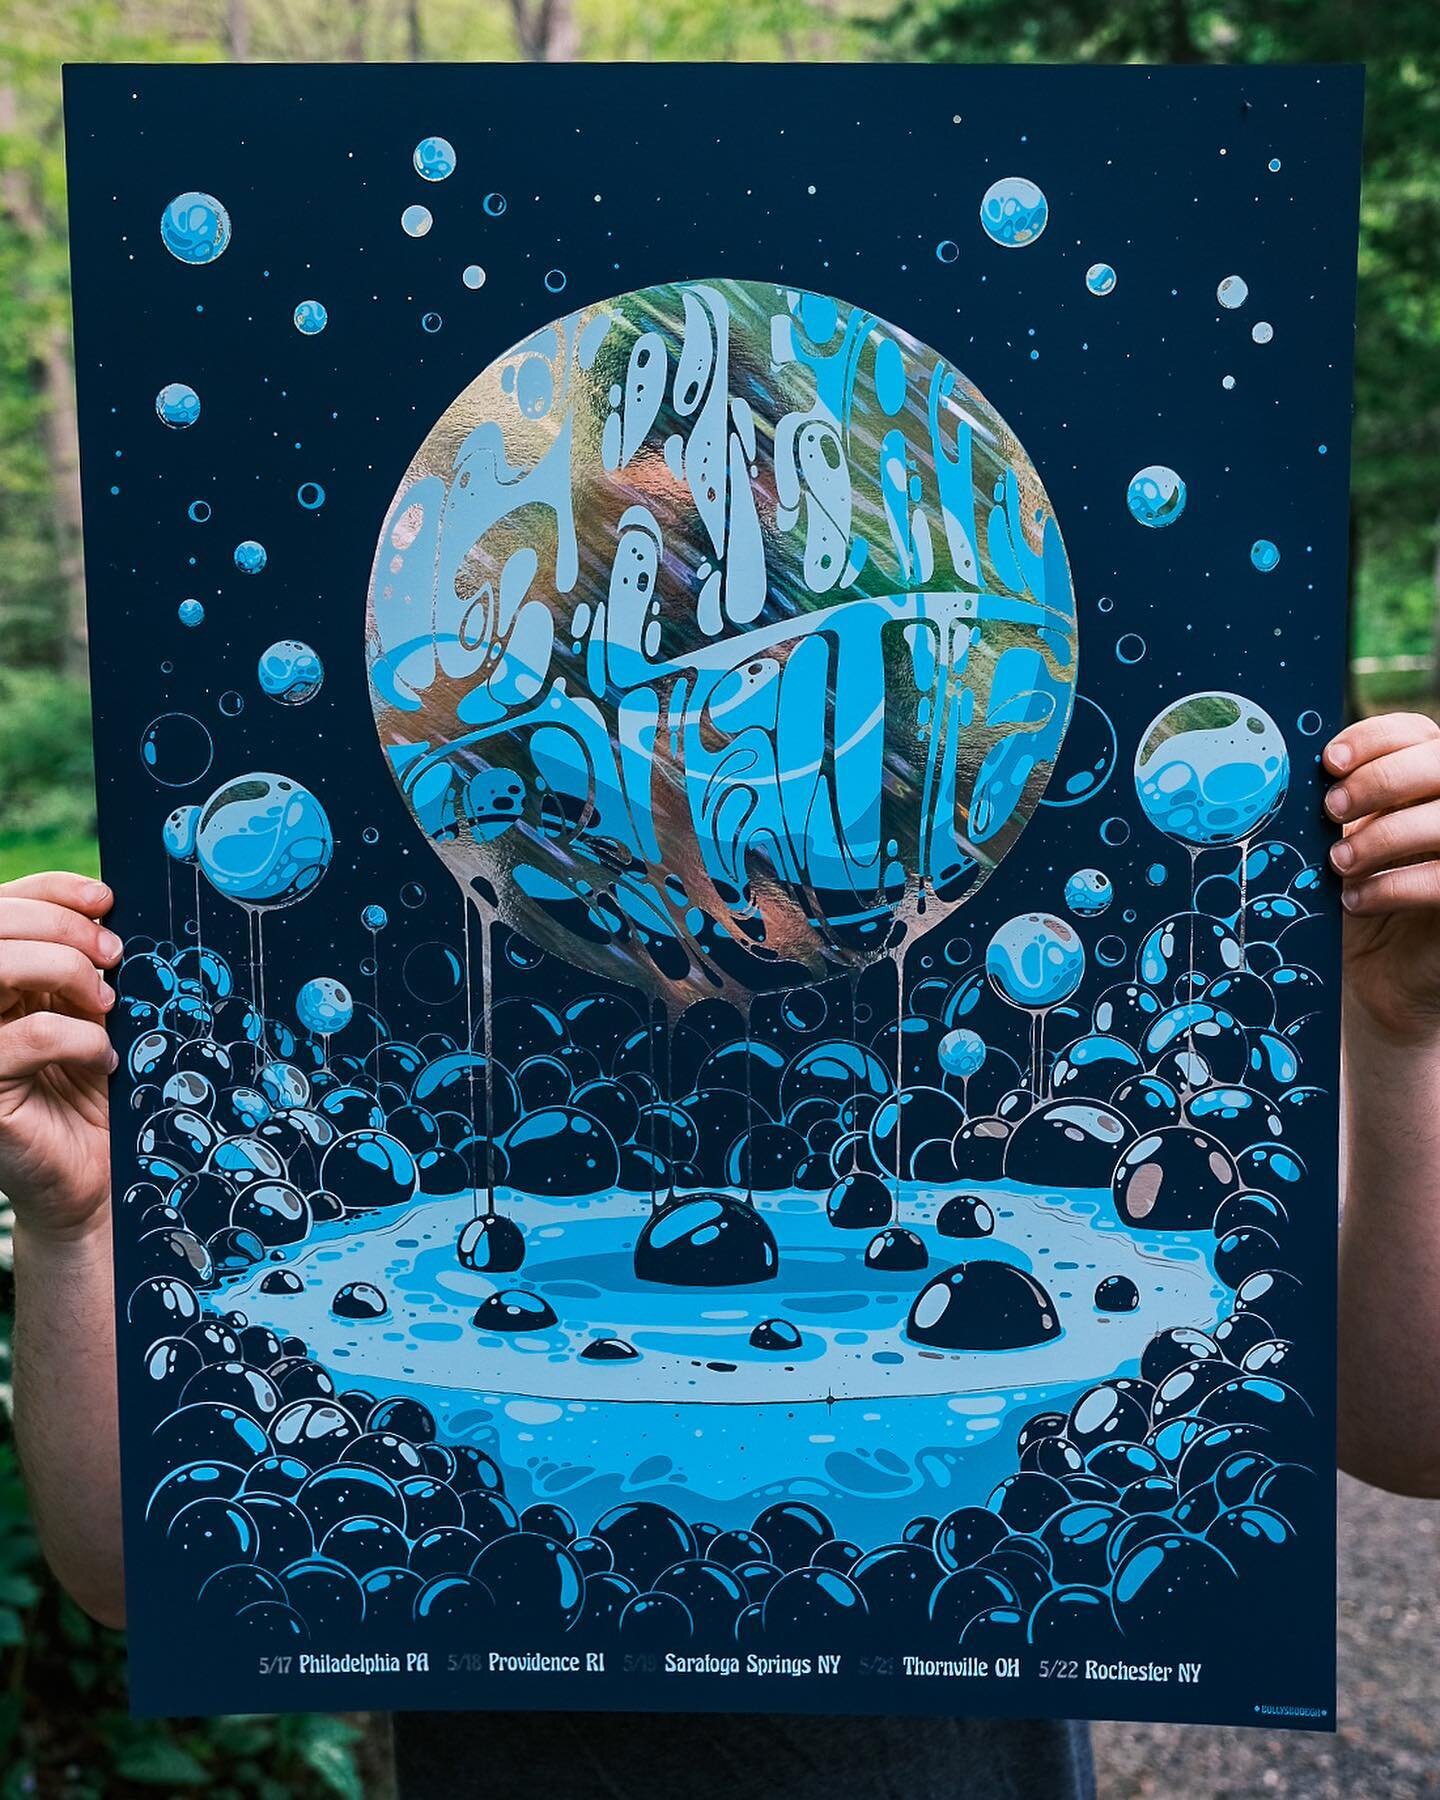 Tour prints designed by Bolly&rsquo;s Bodega!! Avail at the merch booth tonight in Philly &mdash; doors at 7, show at 8!! SOLD OUT :)

(LE 100, 24x18&rdquo;, Foil only) ** Bring tubes!! We don&rsquo;t have them! **